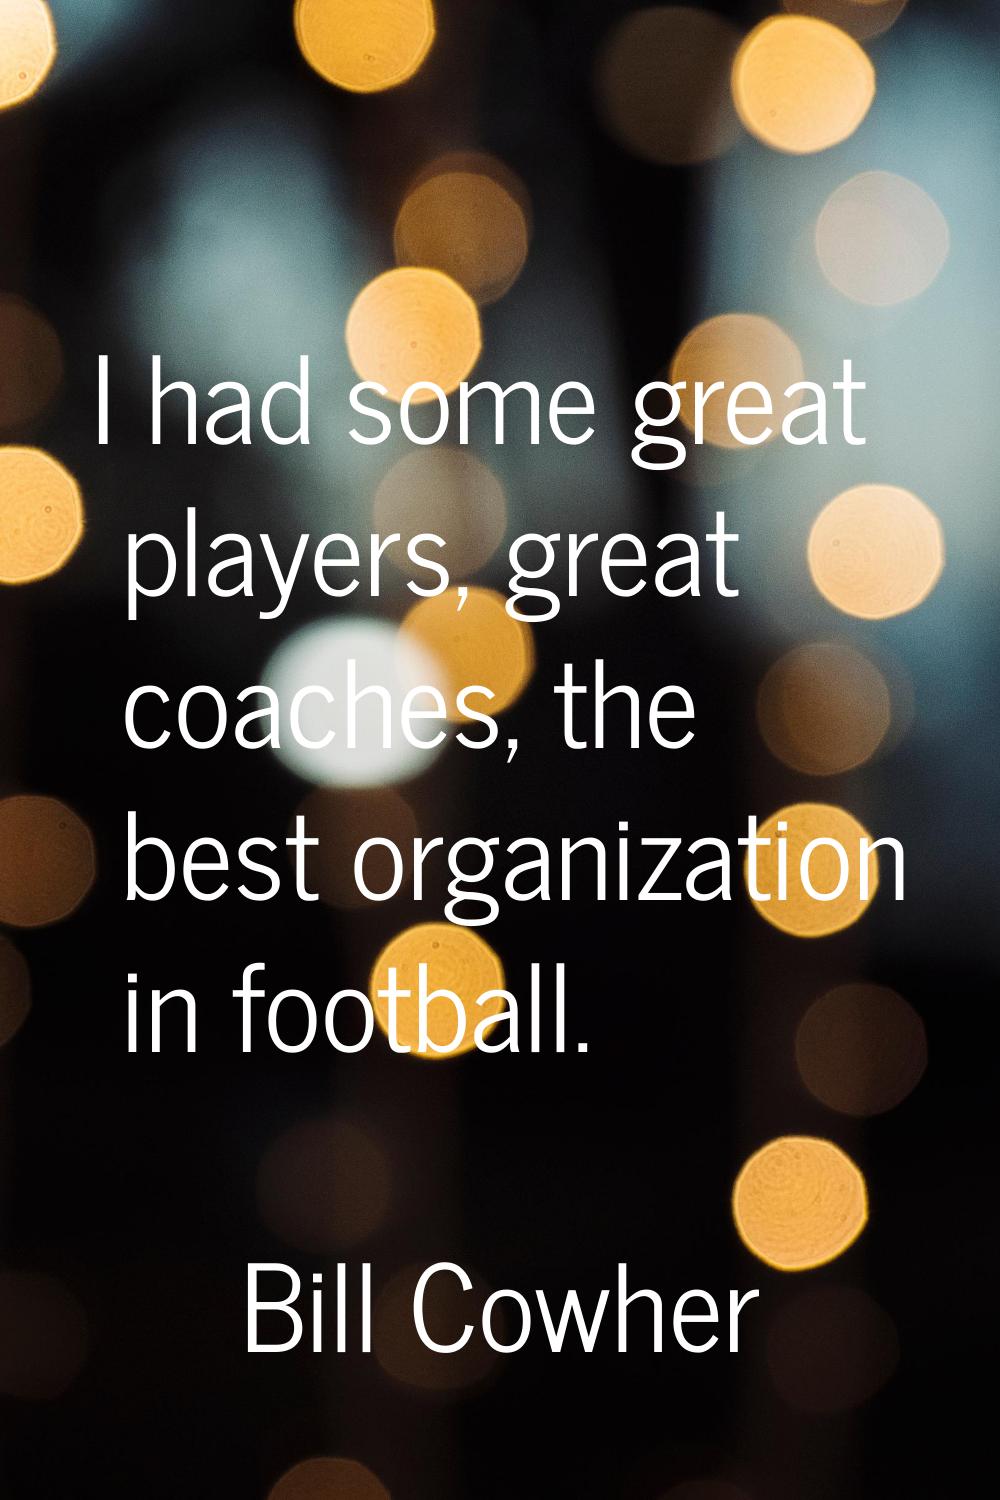 I had some great players, great coaches, the best organization in football.